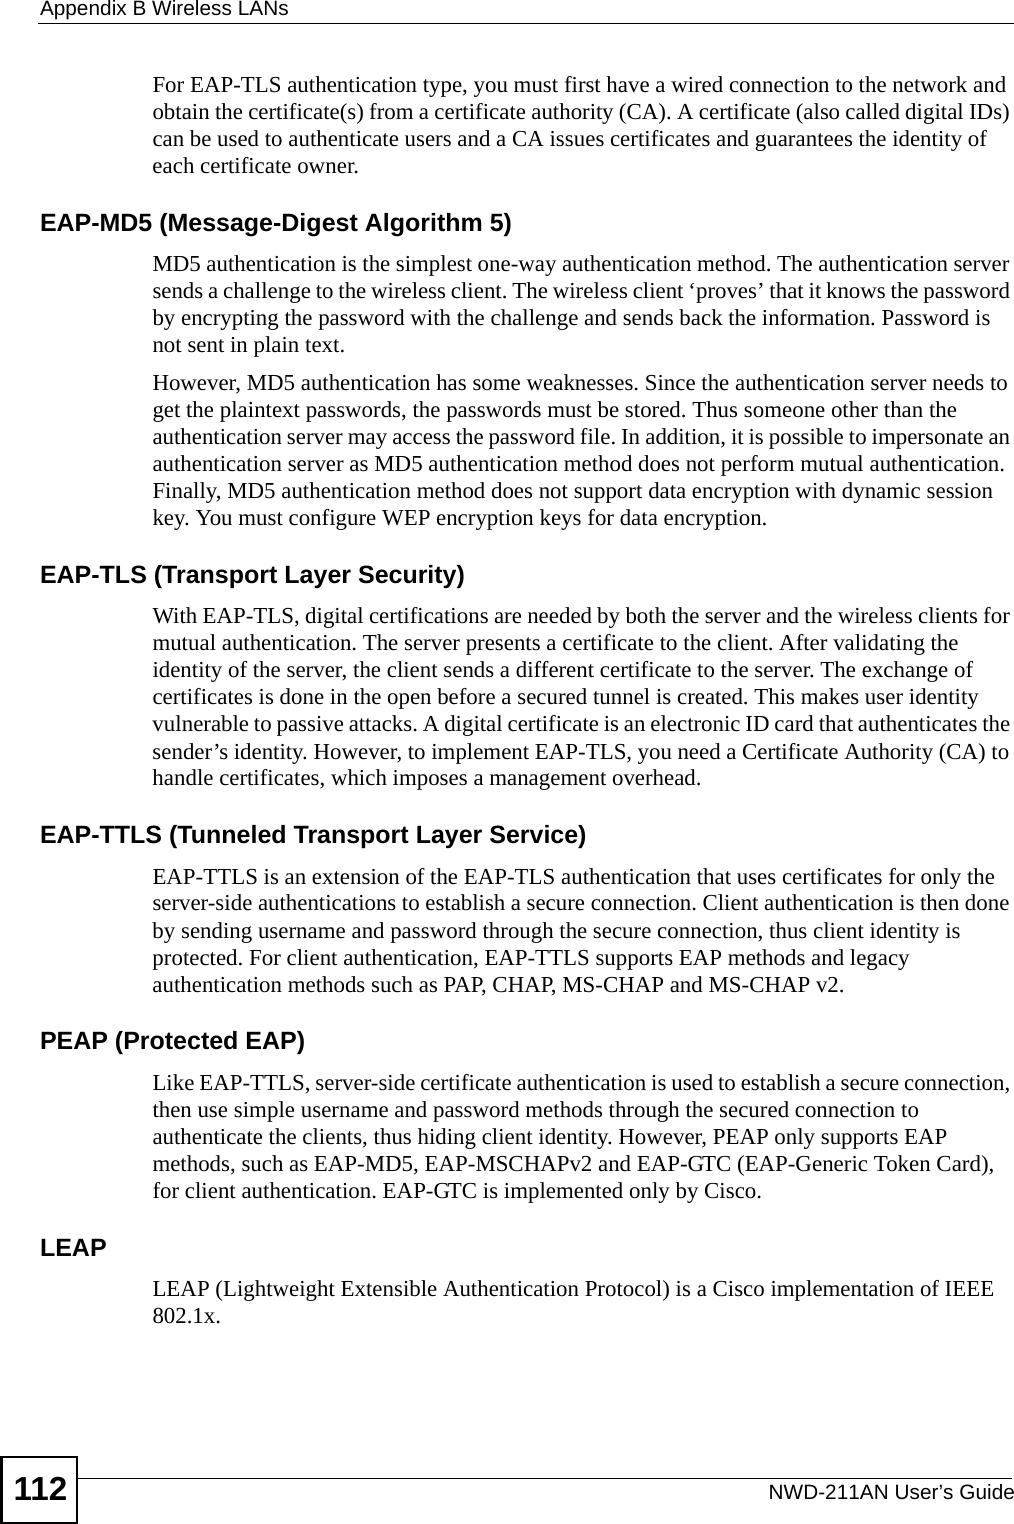 Appendix B Wireless LANsNWD-211AN User’s Guide112For EAP-TLS authentication type, you must first have a wired connection to the network and obtain the certificate(s) from a certificate authority (CA). A certificate (also called digital IDs) can be used to authenticate users and a CA issues certificates and guarantees the identity of each certificate owner.EAP-MD5 (Message-Digest Algorithm 5)MD5 authentication is the simplest one-way authentication method. The authentication server sends a challenge to the wireless client. The wireless client ‘proves’ that it knows the password by encrypting the password with the challenge and sends back the information. Password is not sent in plain text. However, MD5 authentication has some weaknesses. Since the authentication server needs to get the plaintext passwords, the passwords must be stored. Thus someone other than the authentication server may access the password file. In addition, it is possible to impersonate an authentication server as MD5 authentication method does not perform mutual authentication. Finally, MD5 authentication method does not support data encryption with dynamic session key. You must configure WEP encryption keys for data encryption. EAP-TLS (Transport Layer Security)With EAP-TLS, digital certifications are needed by both the server and the wireless clients for mutual authentication. The server presents a certificate to the client. After validating the identity of the server, the client sends a different certificate to the server. The exchange of certificates is done in the open before a secured tunnel is created. This makes user identity vulnerable to passive attacks. A digital certificate is an electronic ID card that authenticates the sender’s identity. However, to implement EAP-TLS, you need a Certificate Authority (CA) to handle certificates, which imposes a management overhead. EAP-TTLS (Tunneled Transport Layer Service) EAP-TTLS is an extension of the EAP-TLS authentication that uses certificates for only the server-side authentications to establish a secure connection. Client authentication is then done by sending username and password through the secure connection, thus client identity is protected. For client authentication, EAP-TTLS supports EAP methods and legacy authentication methods such as PAP, CHAP, MS-CHAP and MS-CHAP v2. PEAP (Protected EAP)   Like EAP-TTLS, server-side certificate authentication is used to establish a secure connection, then use simple username and password methods through the secured connection to authenticate the clients, thus hiding client identity. However, PEAP only supports EAP methods, such as EAP-MD5, EAP-MSCHAPv2 and EAP-GTC (EAP-Generic Token Card), for client authentication. EAP-GTC is implemented only by Cisco.LEAPLEAP (Lightweight Extensible Authentication Protocol) is a Cisco implementation of IEEE 802.1x. 